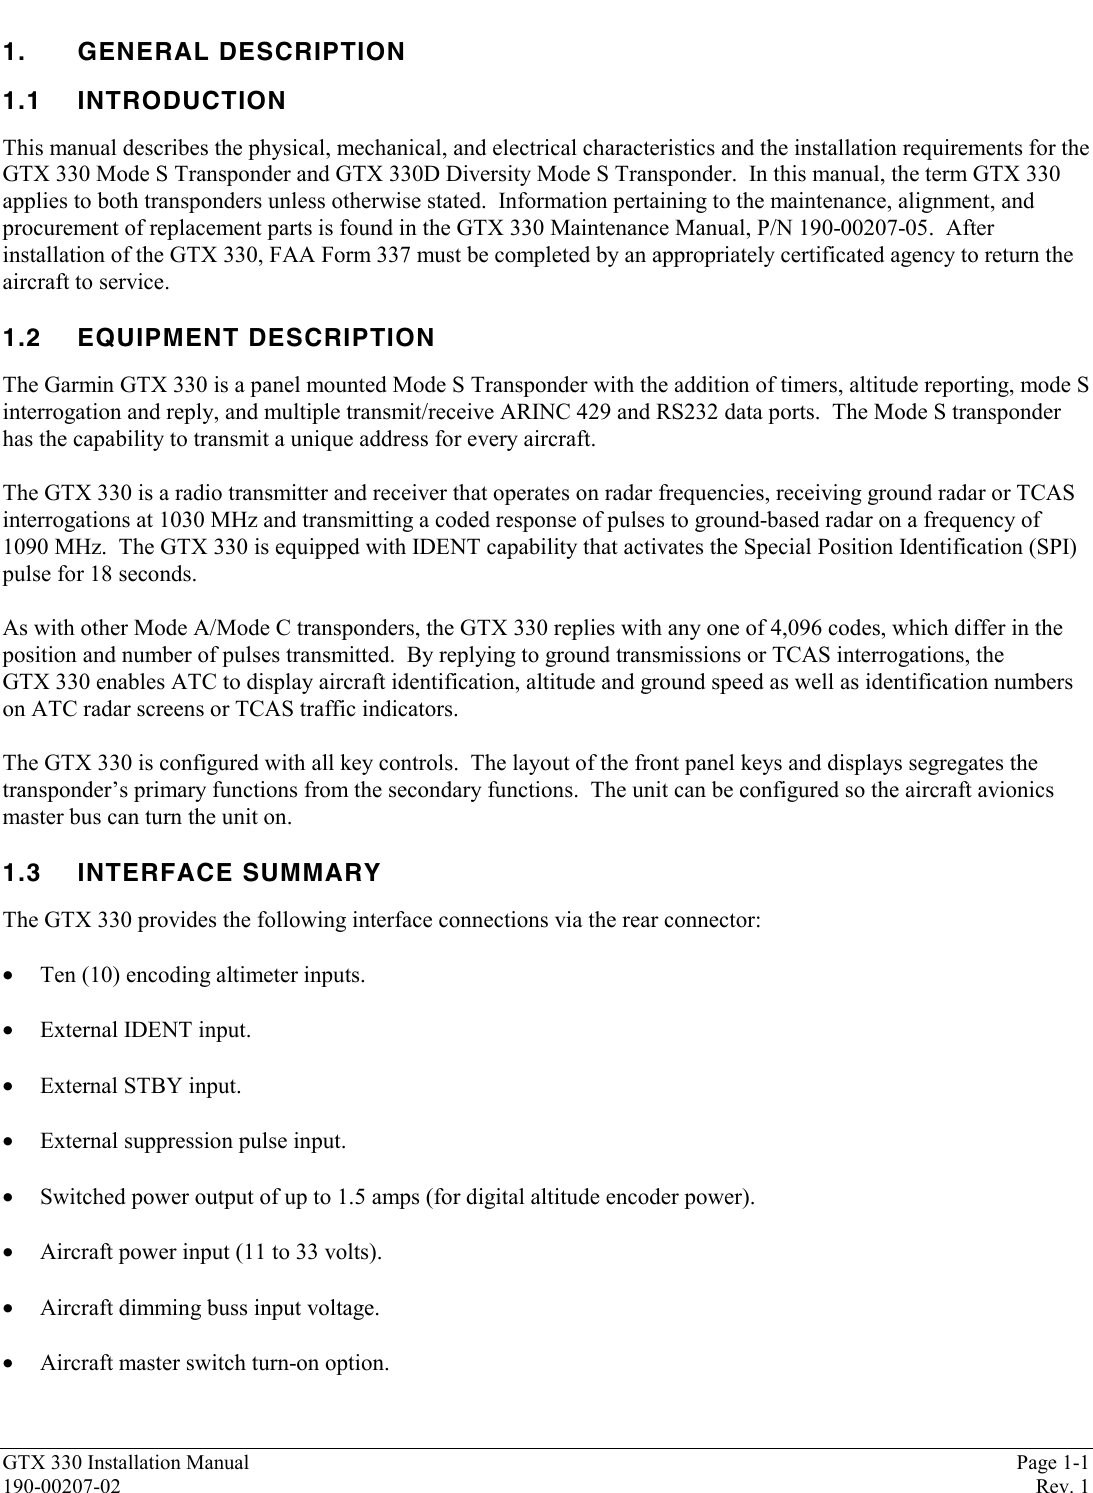 GTX 330 Installation Manual Page 1-1190-00207-02 Rev. 11. GENERAL DESCRIPTION1.1 INTRODUCTIONThis manual describes the physical, mechanical, and electrical characteristics and the installation requirements for theGTX 330 Mode S Transponder and GTX 330D Diversity Mode S Transponder.  In this manual, the term GTX 330applies to both transponders unless otherwise stated.  Information pertaining to the maintenance, alignment, andprocurement of replacement parts is found in the GTX 330 Maintenance Manual, P/N 190-00207-05.  Afterinstallation of the GTX 330, FAA Form 337 must be completed by an appropriately certificated agency to return theaircraft to service.1.2 EQUIPMENT DESCRIPTIONThe Garmin GTX 330 is a panel mounted Mode S Transponder with the addition of timers, altitude reporting, mode Sinterrogation and reply, and multiple transmit/receive ARINC 429 and RS232 data ports.  The Mode S transponderhas the capability to transmit a unique address for every aircraft.The GTX 330 is a radio transmitter and receiver that operates on radar frequencies, receiving ground radar or TCASinterrogations at 1030 MHz and transmitting a coded response of pulses to ground-based radar on a frequency of1090 MHz.  The GTX 330 is equipped with IDENT capability that activates the Special Position Identification (SPI)pulse for 18 seconds.As with other Mode A/Mode C transponders, the GTX 330 replies with any one of 4,096 codes, which differ in theposition and number of pulses transmitted.  By replying to ground transmissions or TCAS interrogations, theGTX 330 enables ATC to display aircraft identification, altitude and ground speed as well as identification numberson ATC radar screens or TCAS traffic indicators.The GTX 330 is configured with all key controls.  The layout of the front panel keys and displays segregates thetransponder’s primary functions from the secondary functions.  The unit can be configured so the aircraft avionicsmaster bus can turn the unit on.1.3 INTERFACE SUMMARYThe GTX 330 provides the following interface connections via the rear connector:• Ten (10) encoding altimeter inputs.• External IDENT input.• External STBY input.• External suppression pulse input.• Switched power output of up to 1.5 amps (for digital altitude encoder power).• Aircraft power input (11 to 33 volts).• Aircraft dimming buss input voltage.• Aircraft master switch turn-on option.